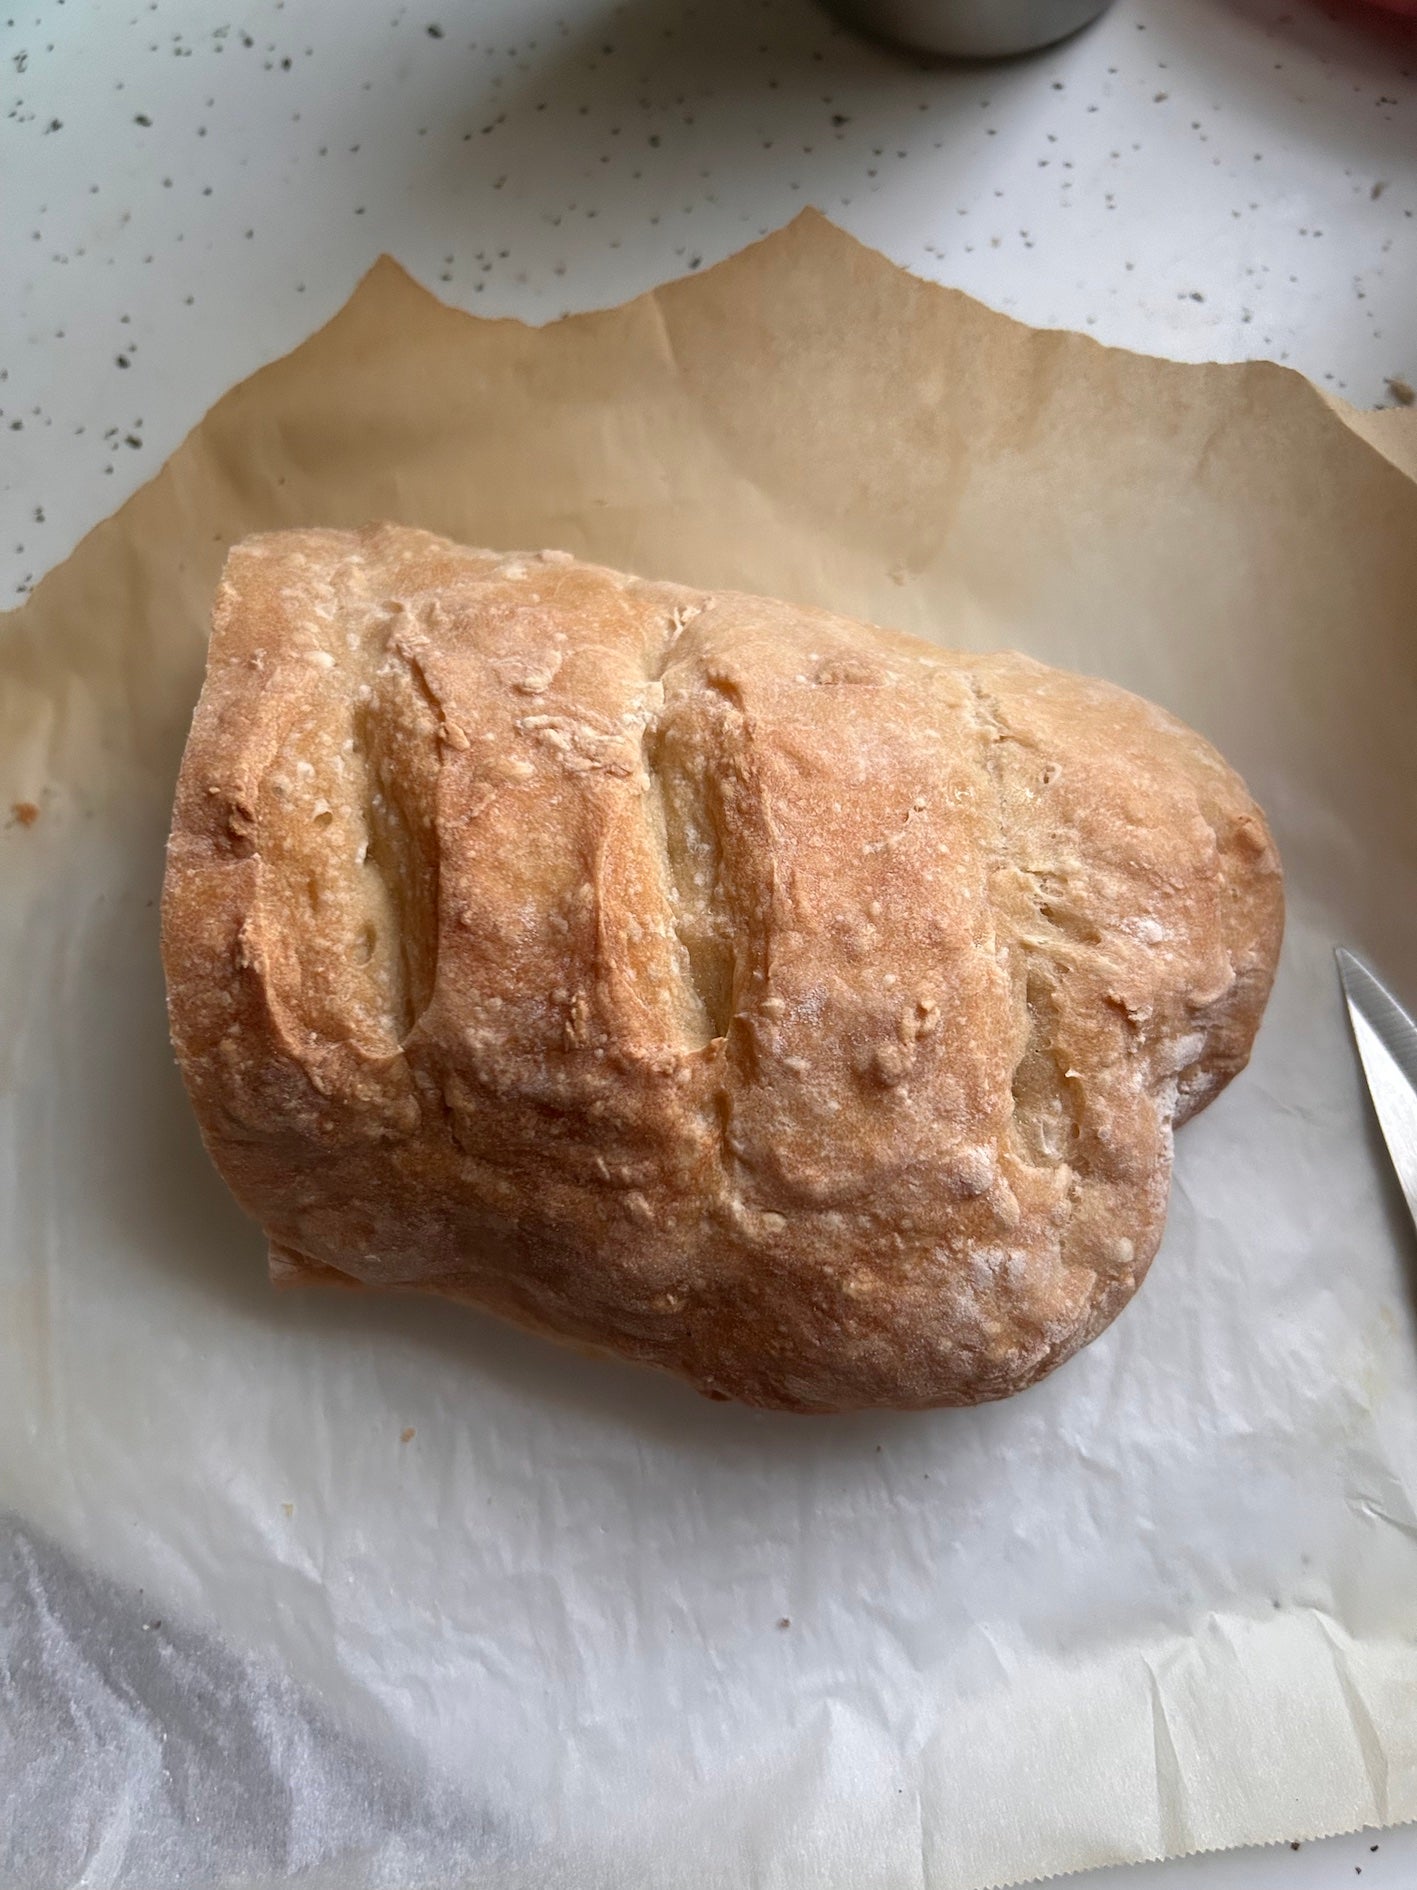 A loaf of bread I baked